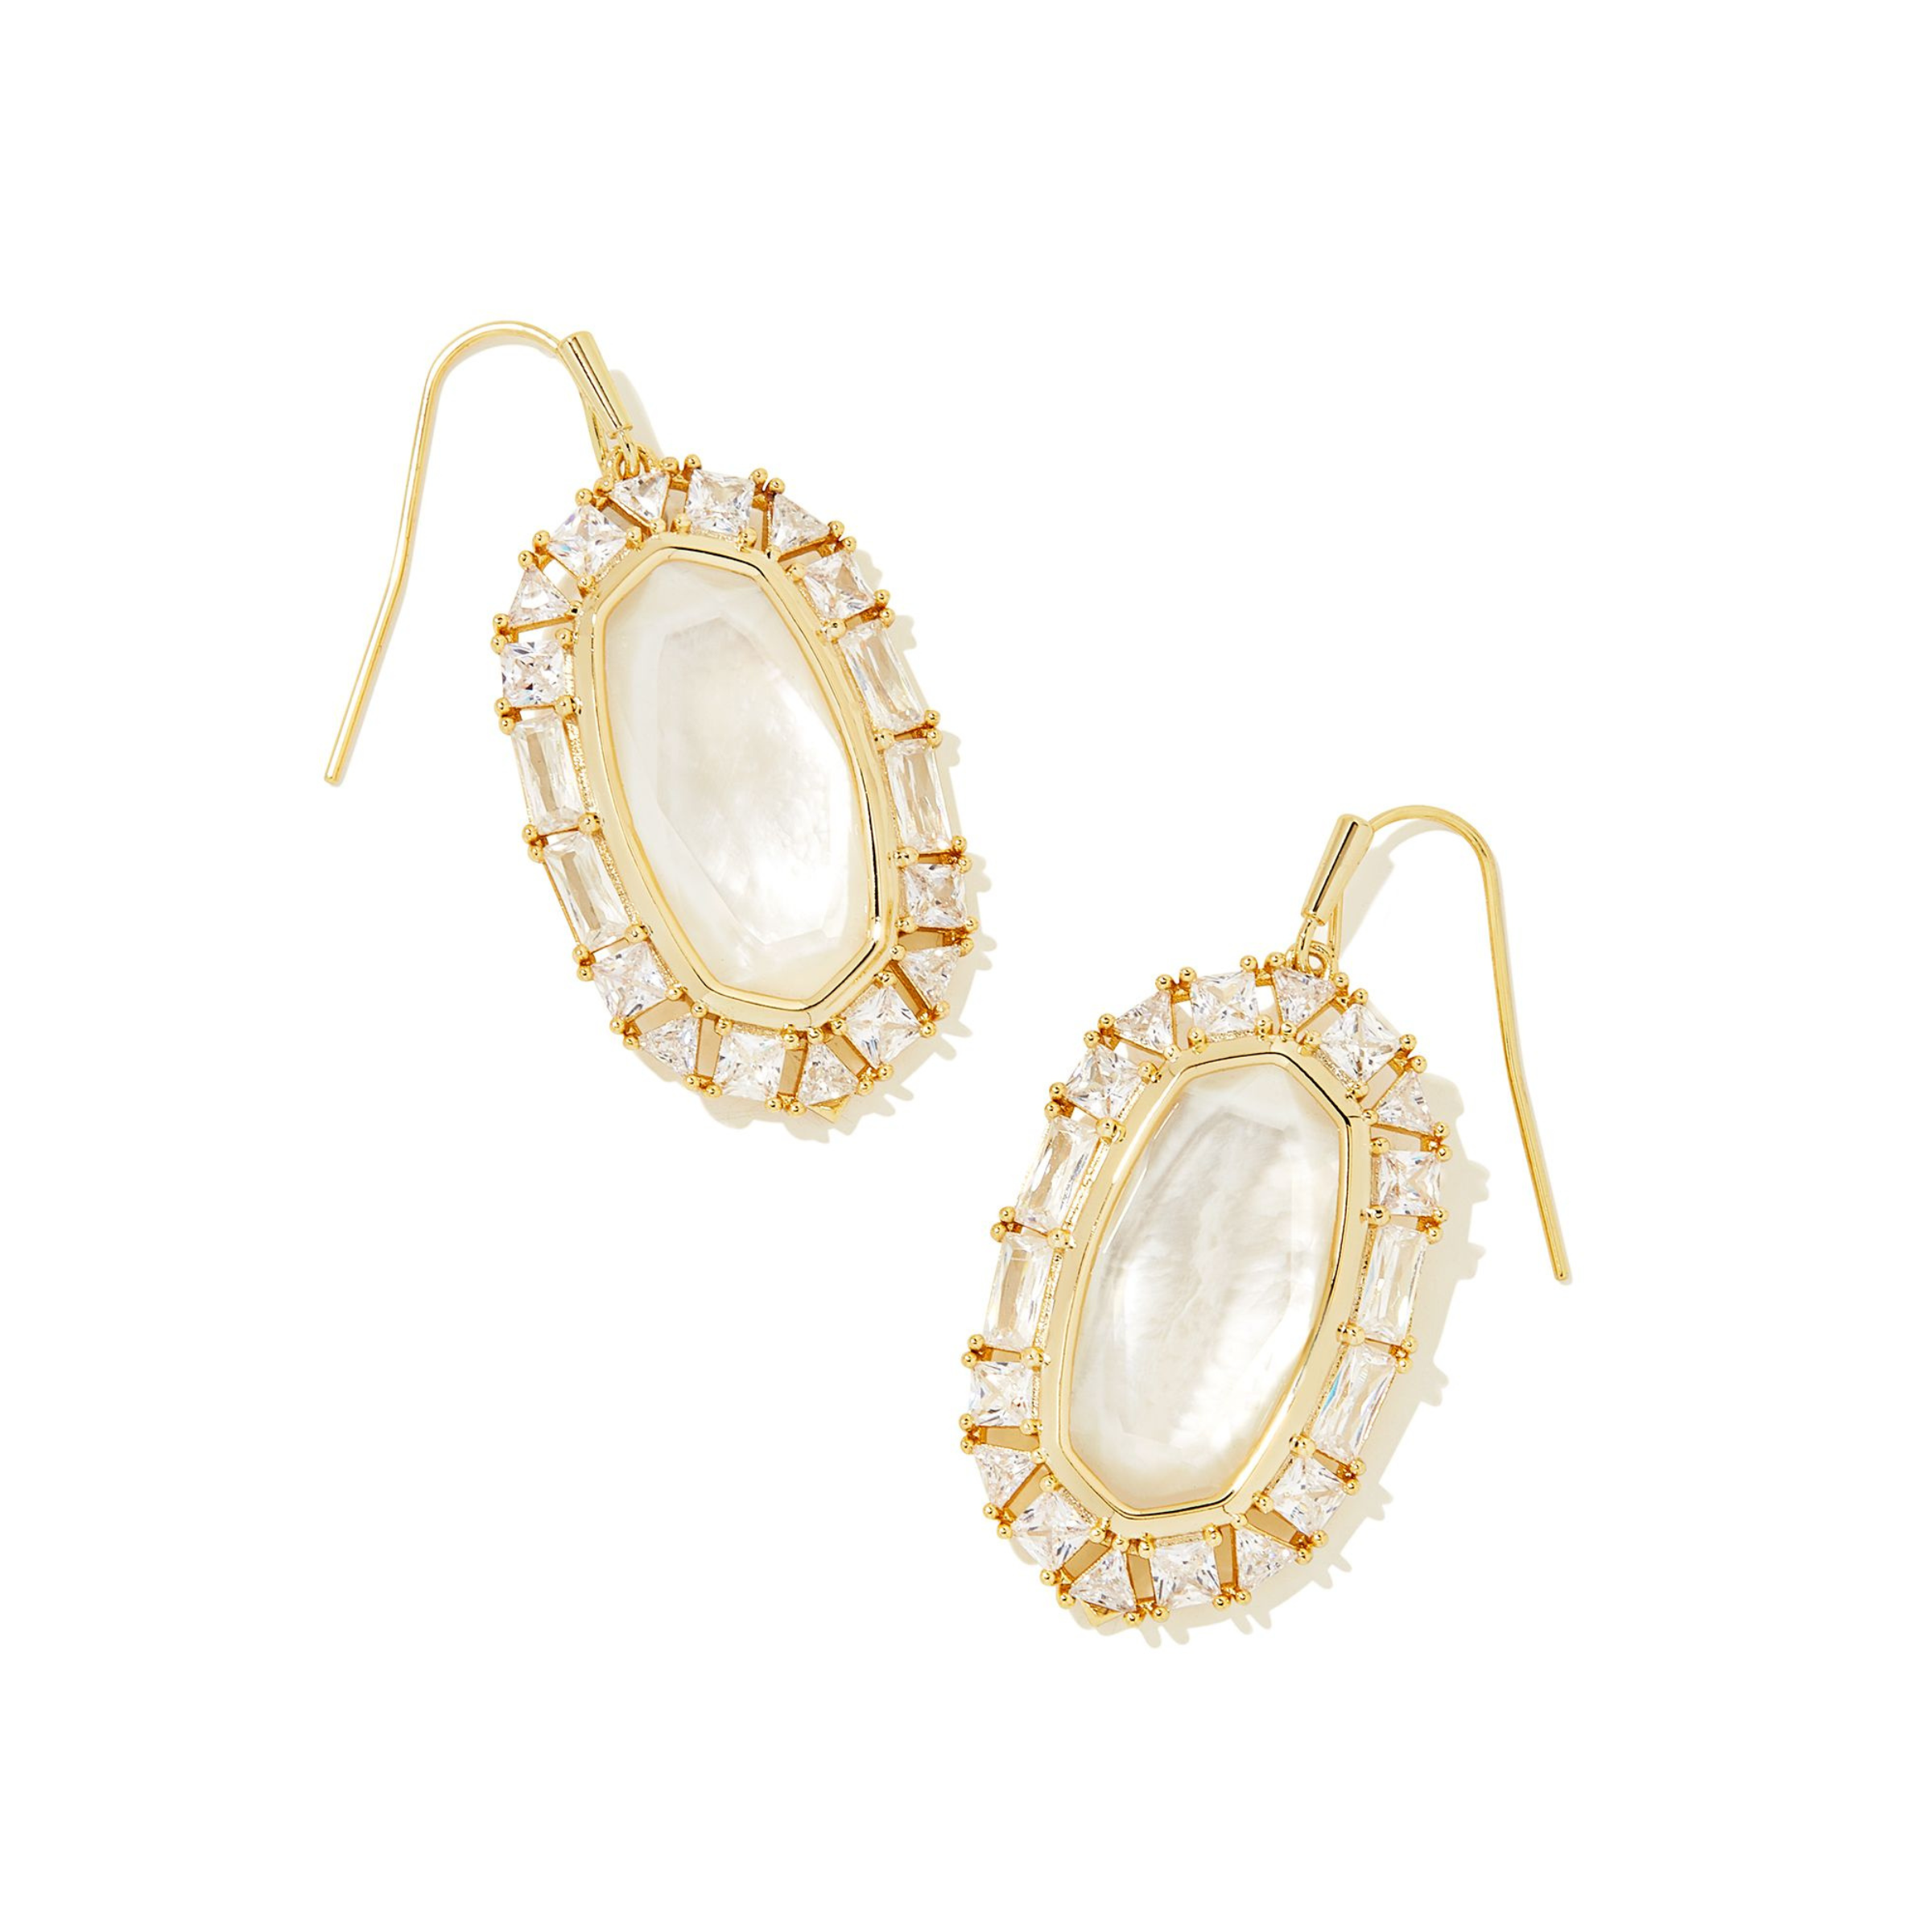 Gold, clear crystal frame drop earrings with ivory mother of pearl center stone pictured on a white background.